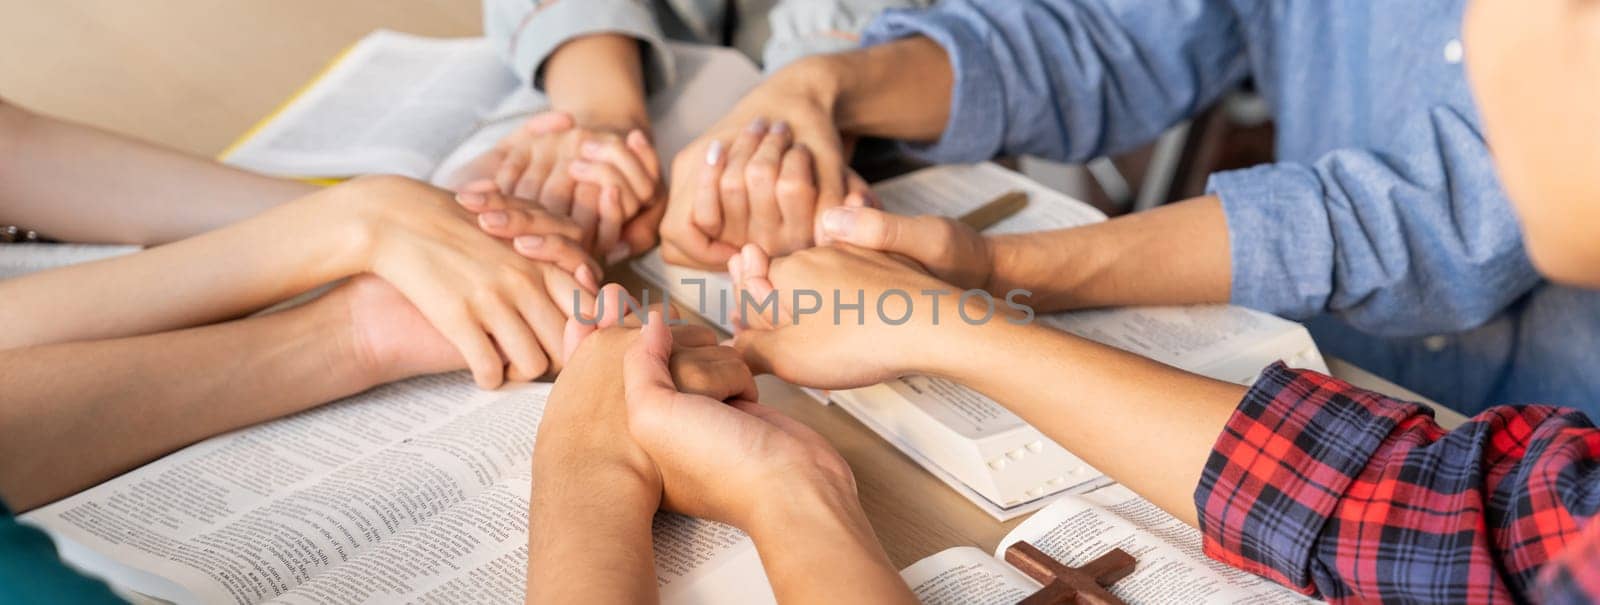 Believer hand praying together on bible book while holding hand. Burgeoning by biancoblue